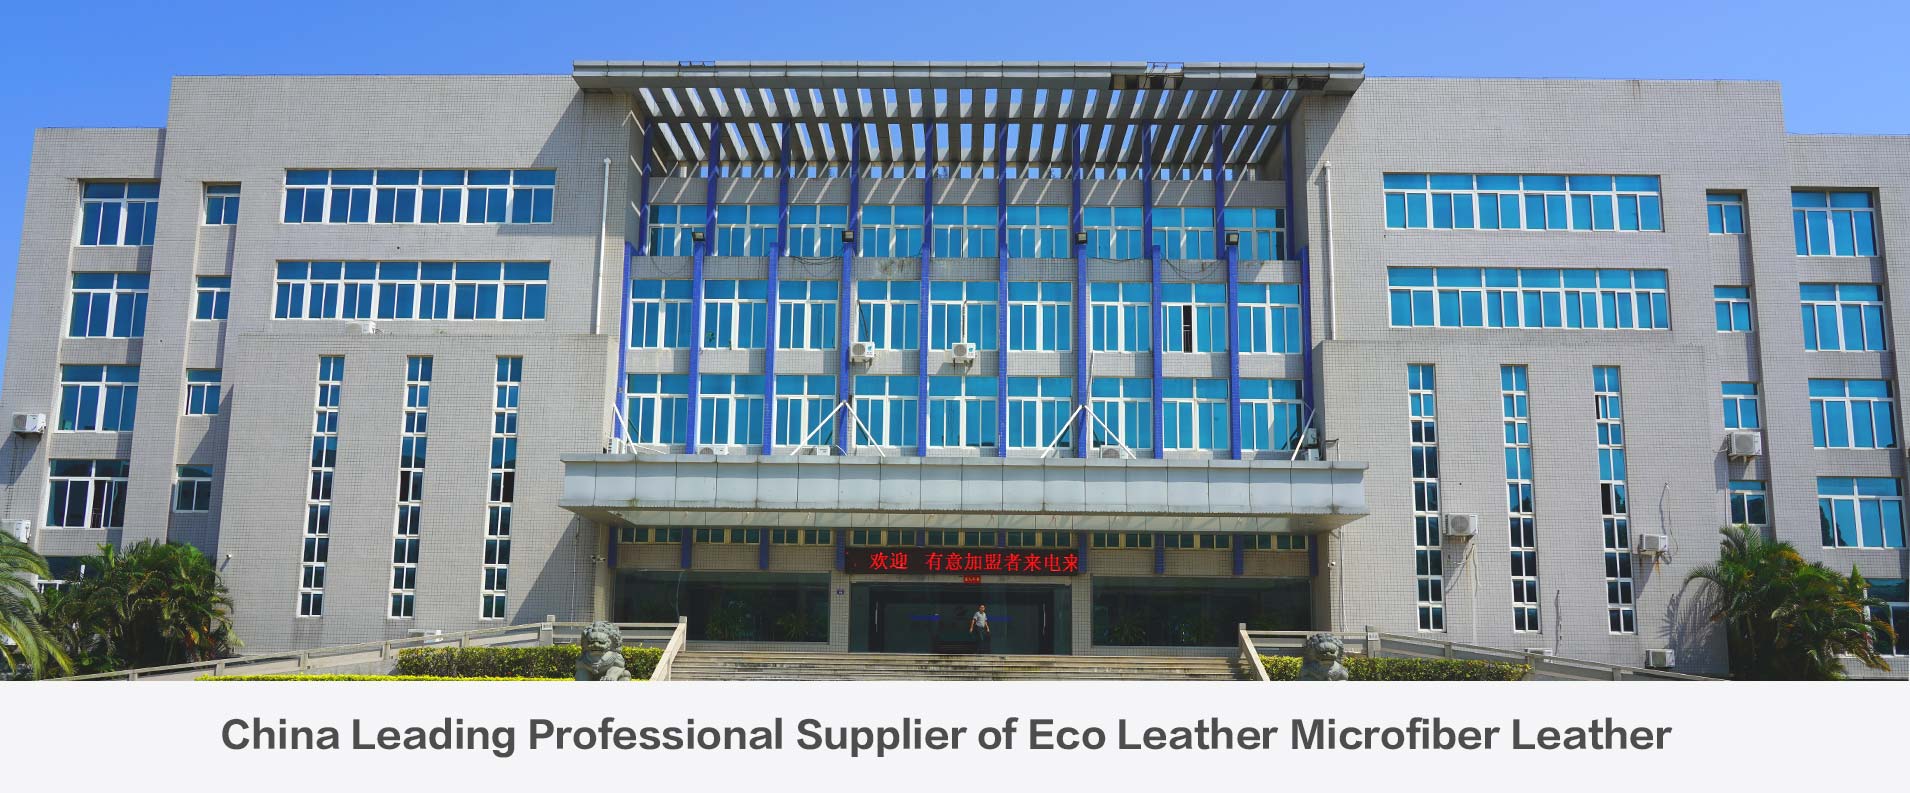 Microfiber Leather Suppliers in China